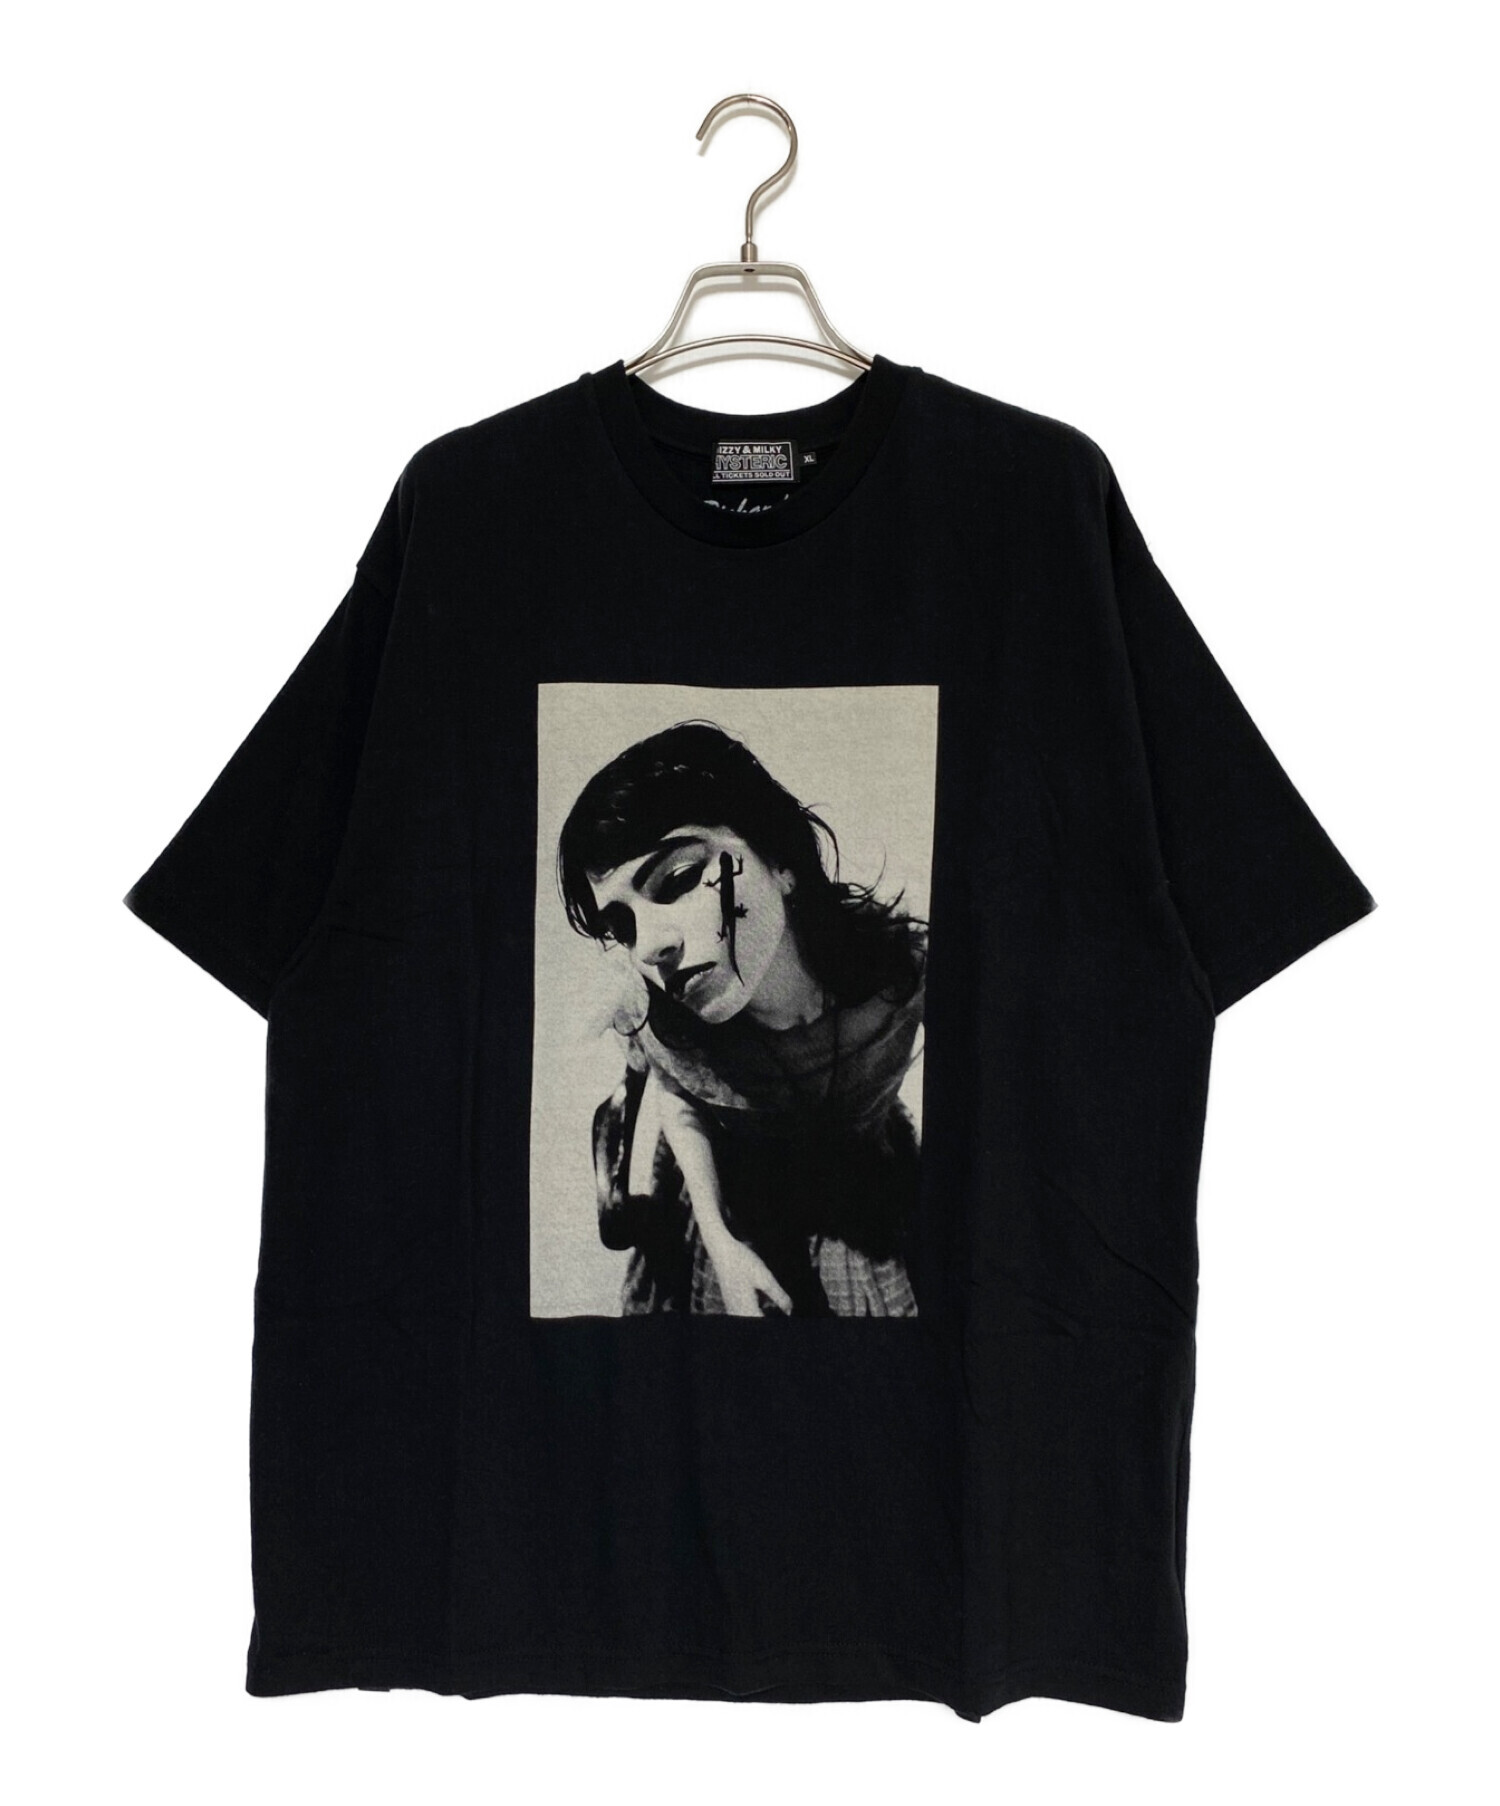 HYSTERIC GLAMOUR×リチャード·カーン Tシャツ - Tシャツ/カットソー 